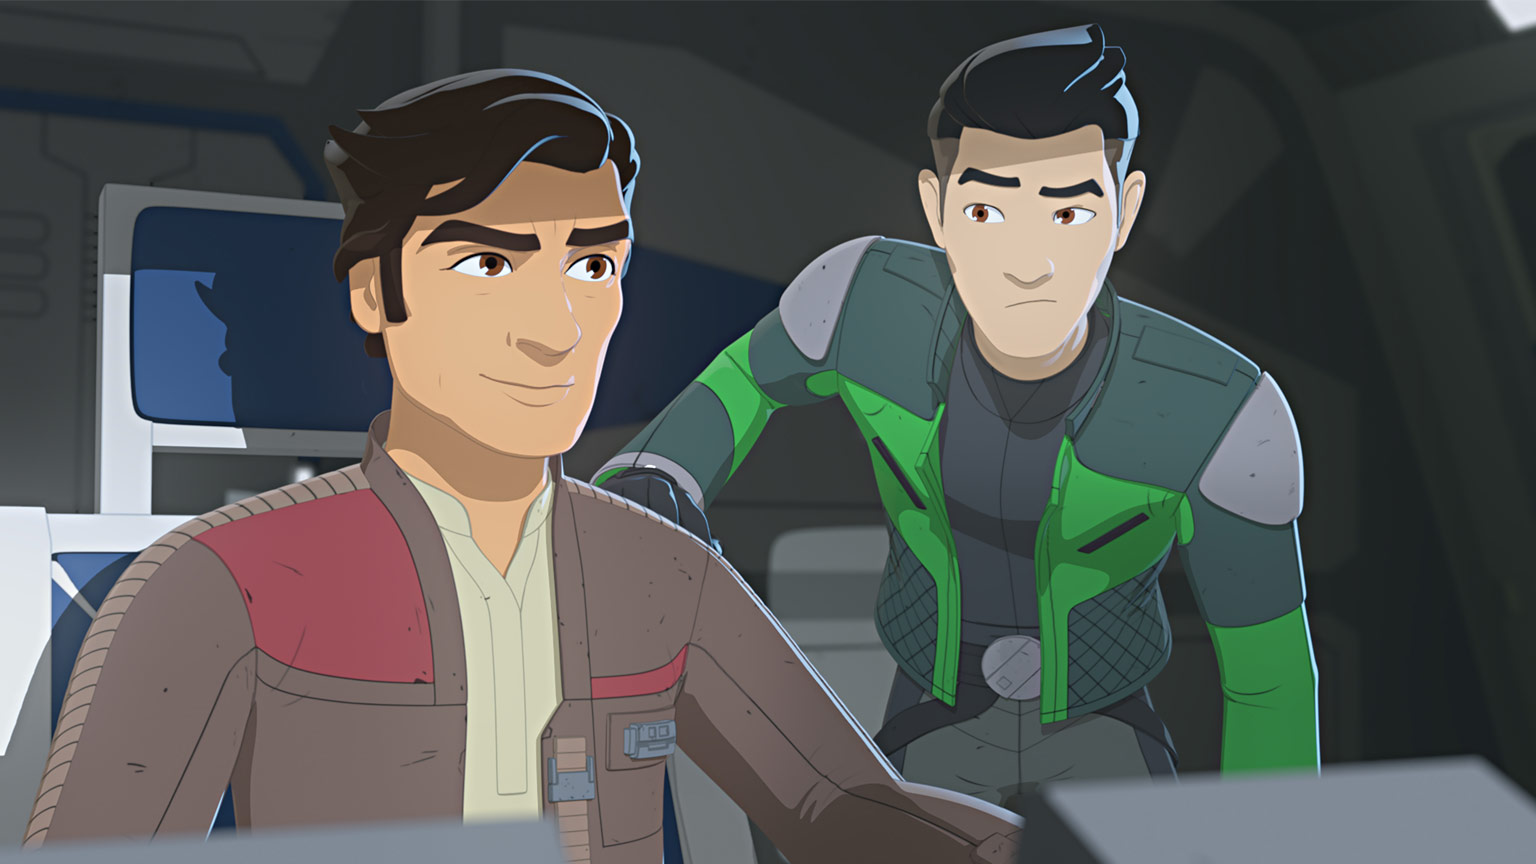 'Star Wars: Resistance' season 1, episodes 1 and 2: 'The Recruit' review